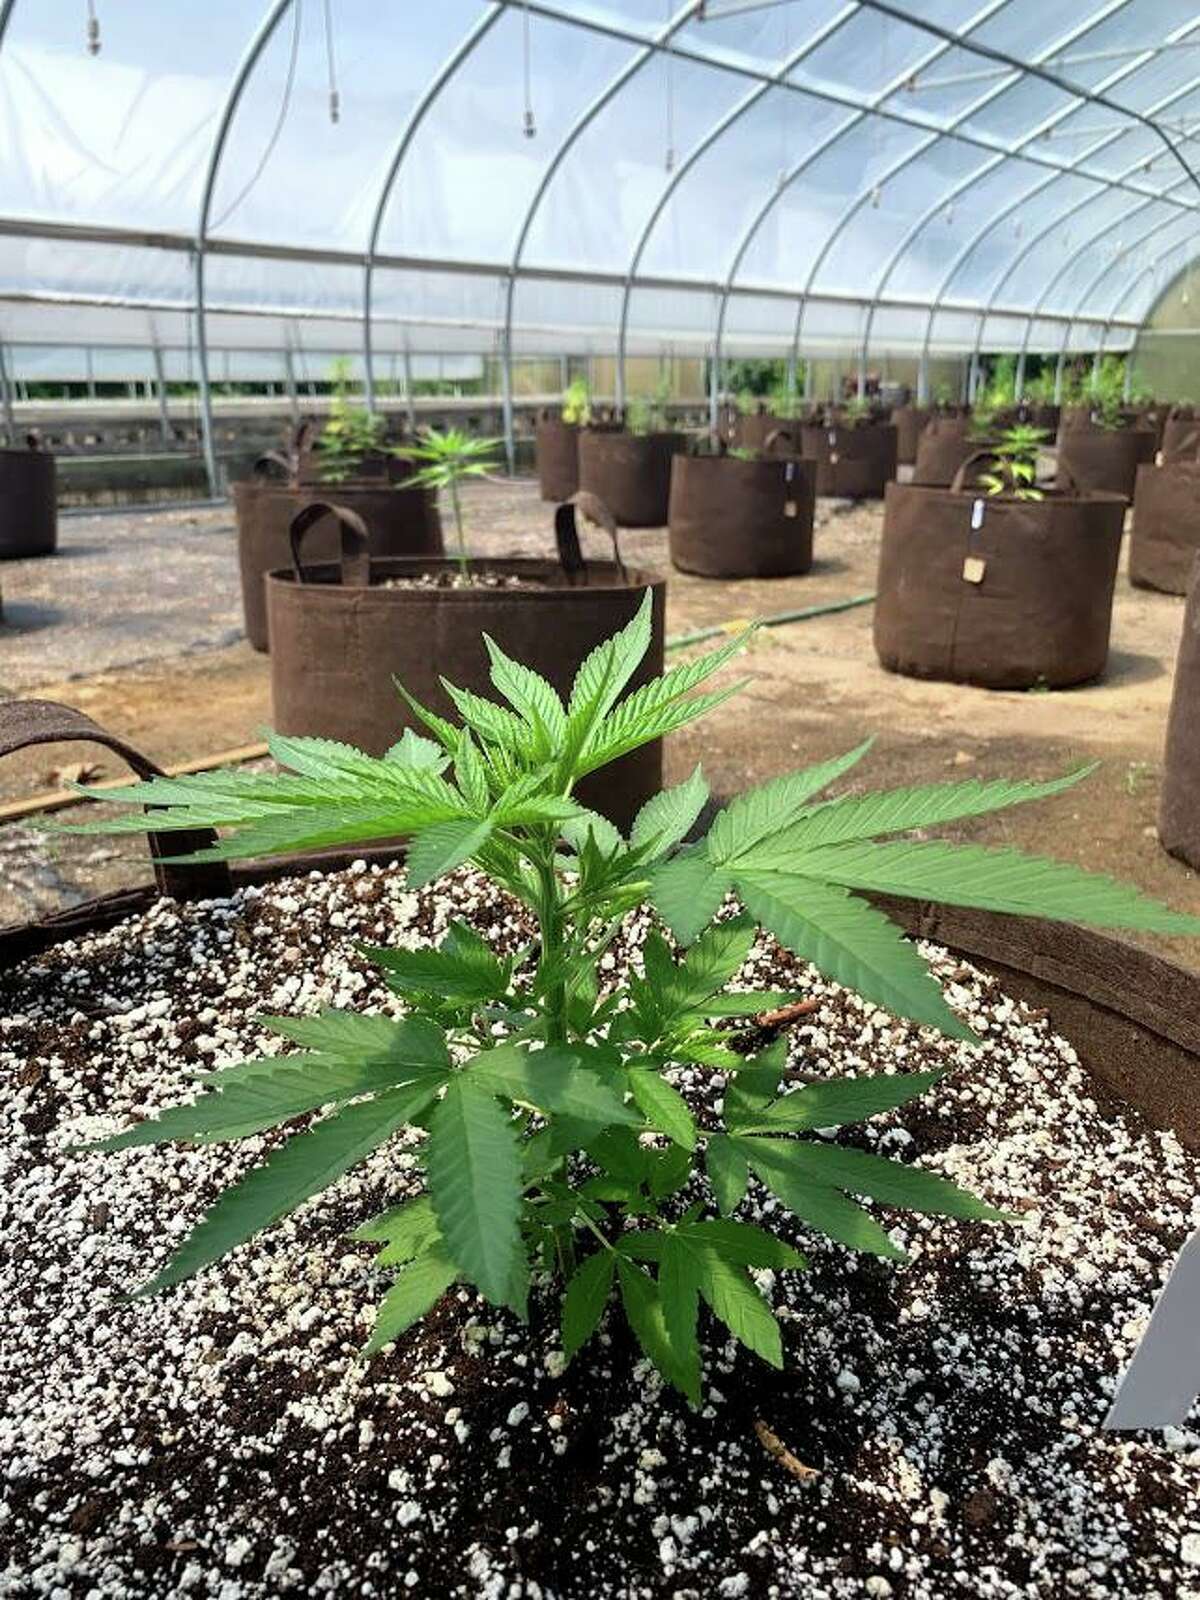 A hemp plant is shown in the greenhouses at Running Brook Farms in Killingworth. The farm just receved a $5,918 USDA rural development grant, which will be used to make energy efficiency improvements with the purchase and installation of LED lighting.